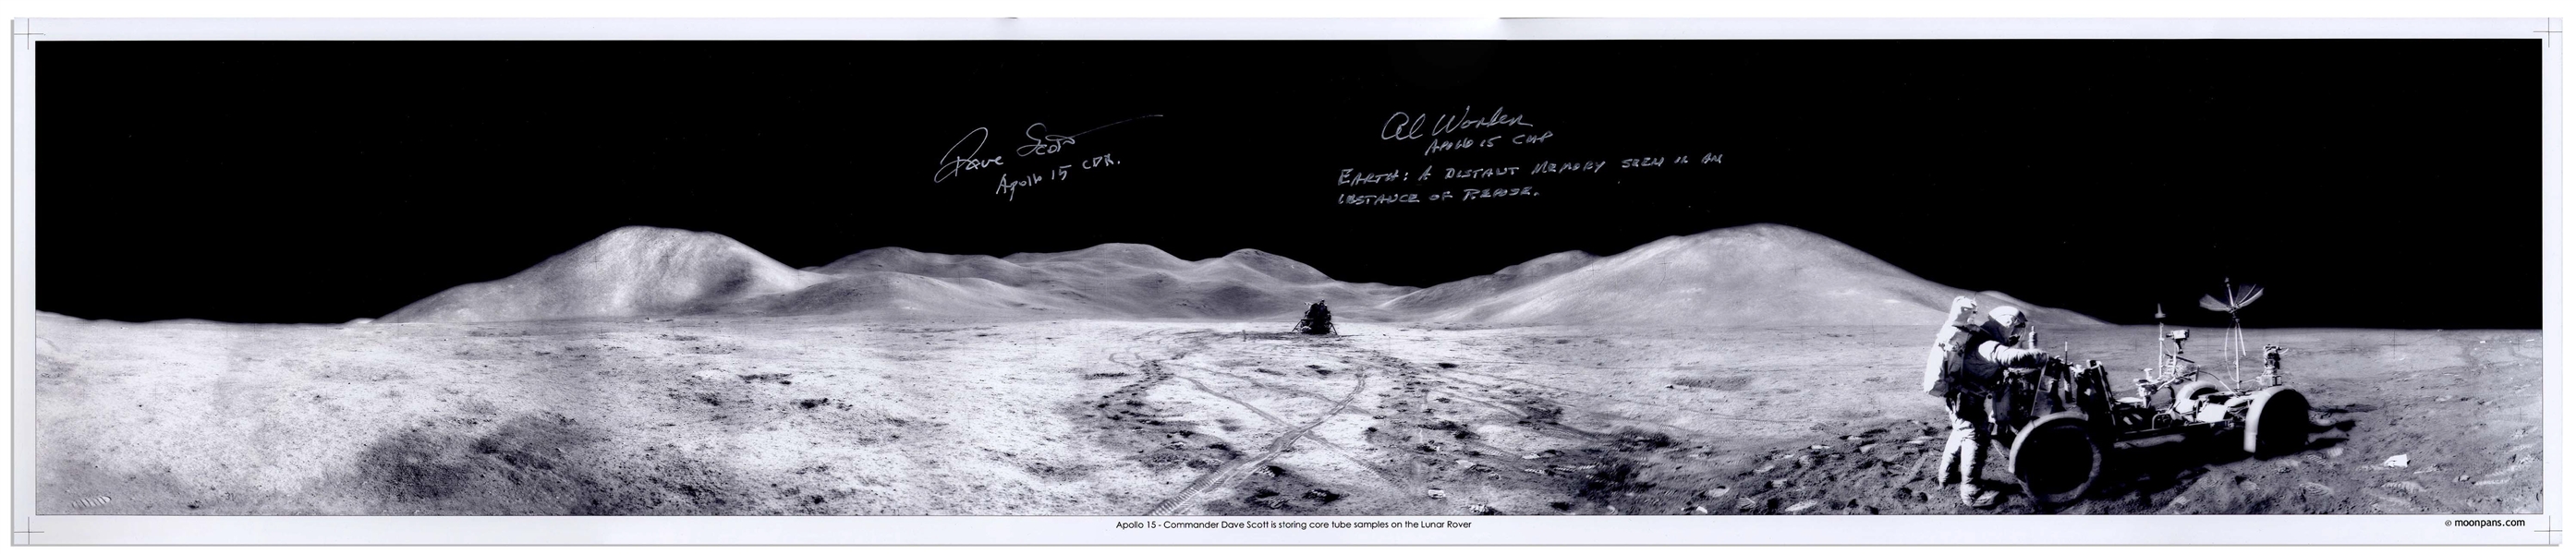 Al Worden & Dave Scott Signed Panoramic 40.5'' x 8.5'' Photo of the Moon's Surface -- Worden Additionally Writes His Famous Quote About Seeing Earth From the Moon